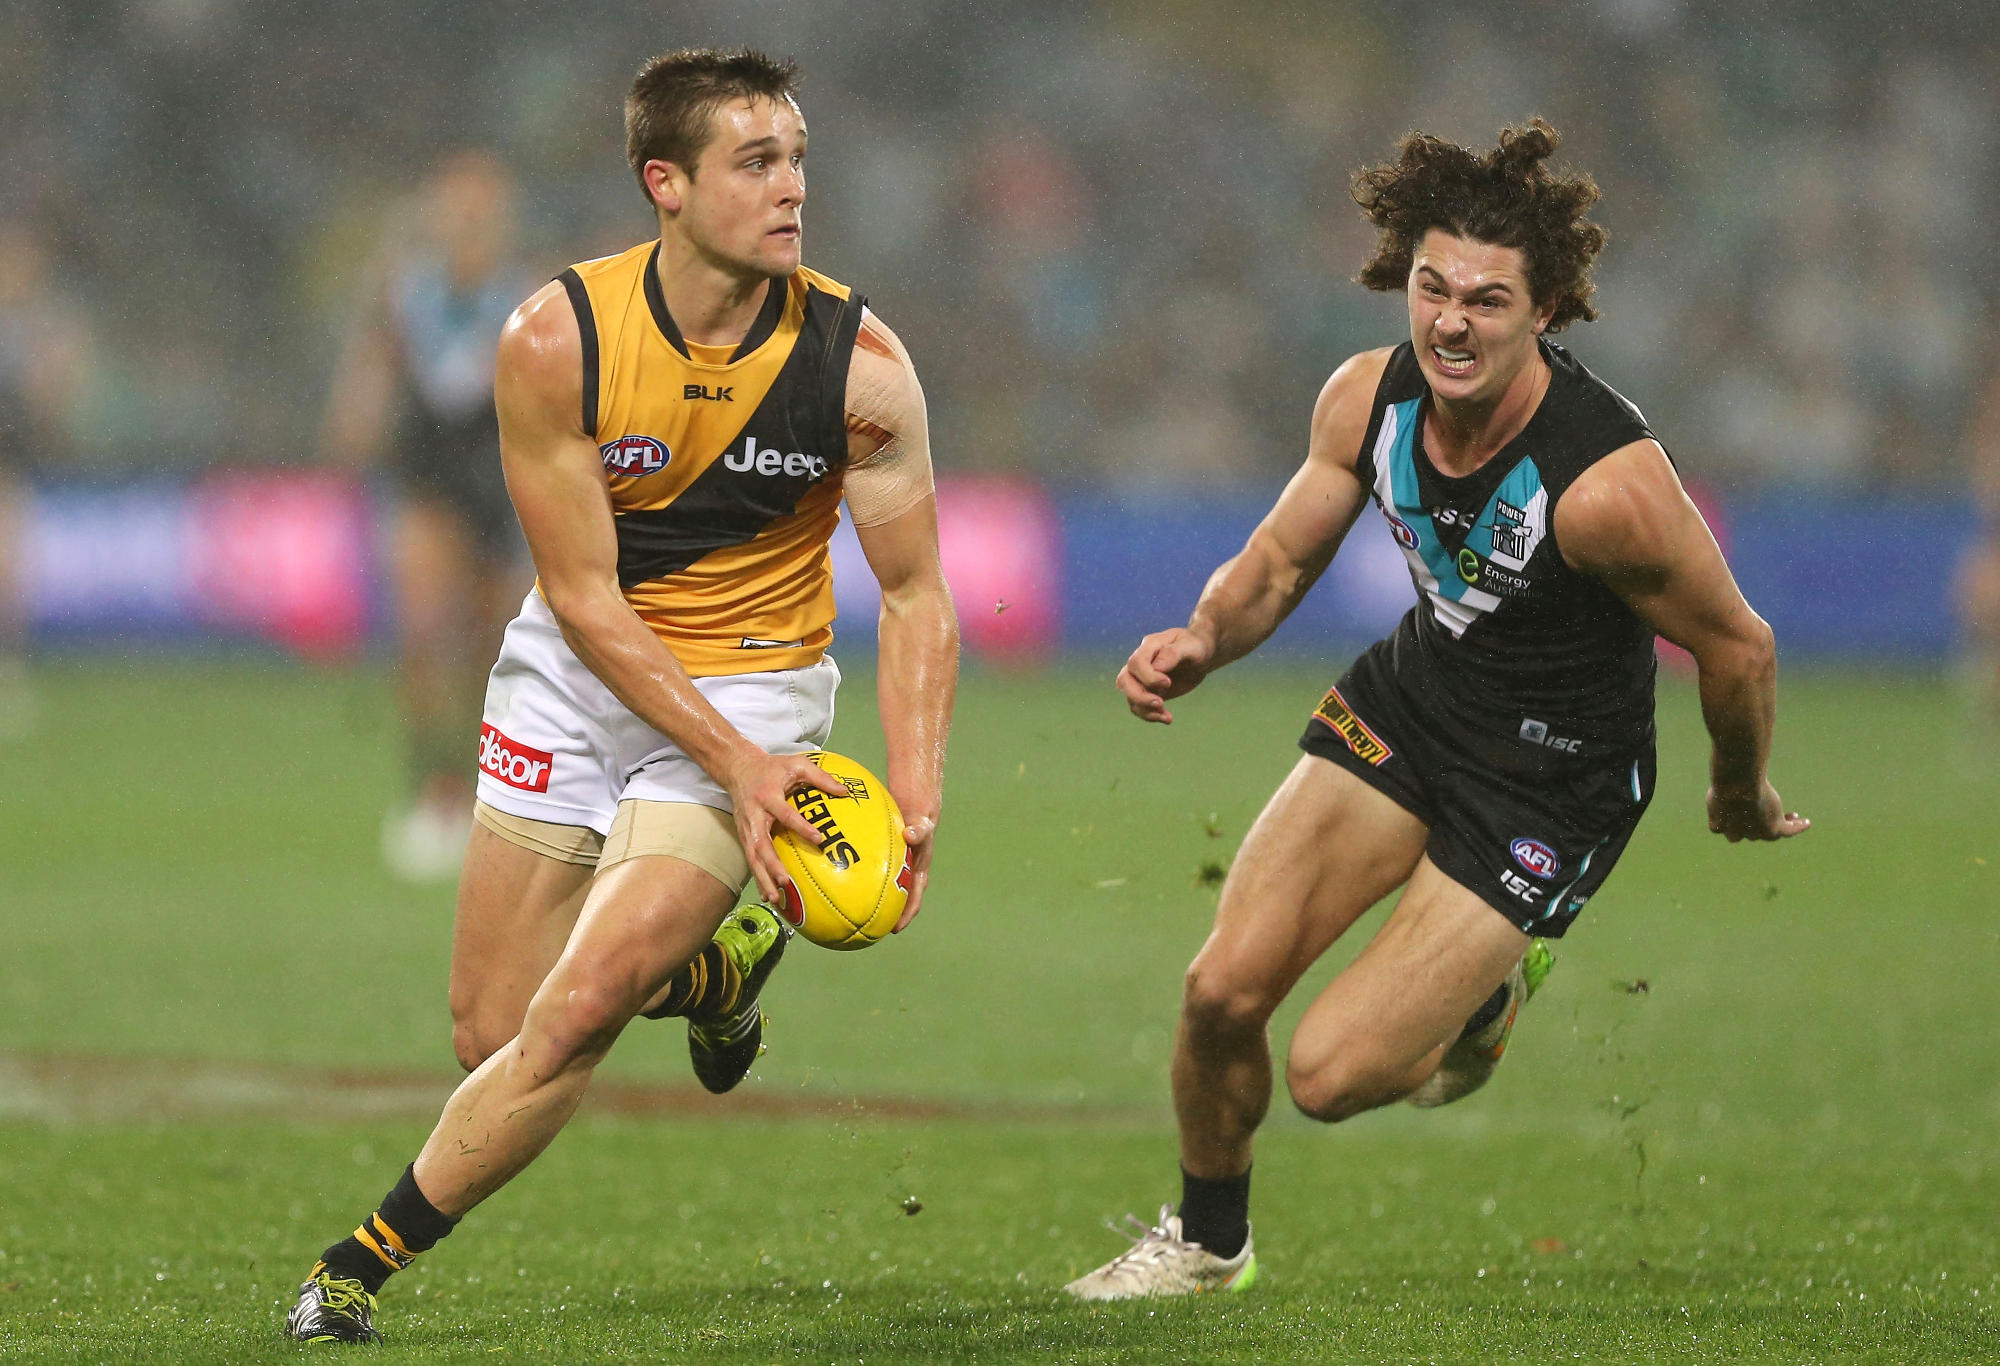 Jayden Short of the Tigers competes with Darcy Byrne-Jones of the Power during the 2016 AFL Round 15 match between Port Adelaide Power and the Richmond Tigers at Adelaide Oval on July 1, 2016 in Adelaide, Australia.